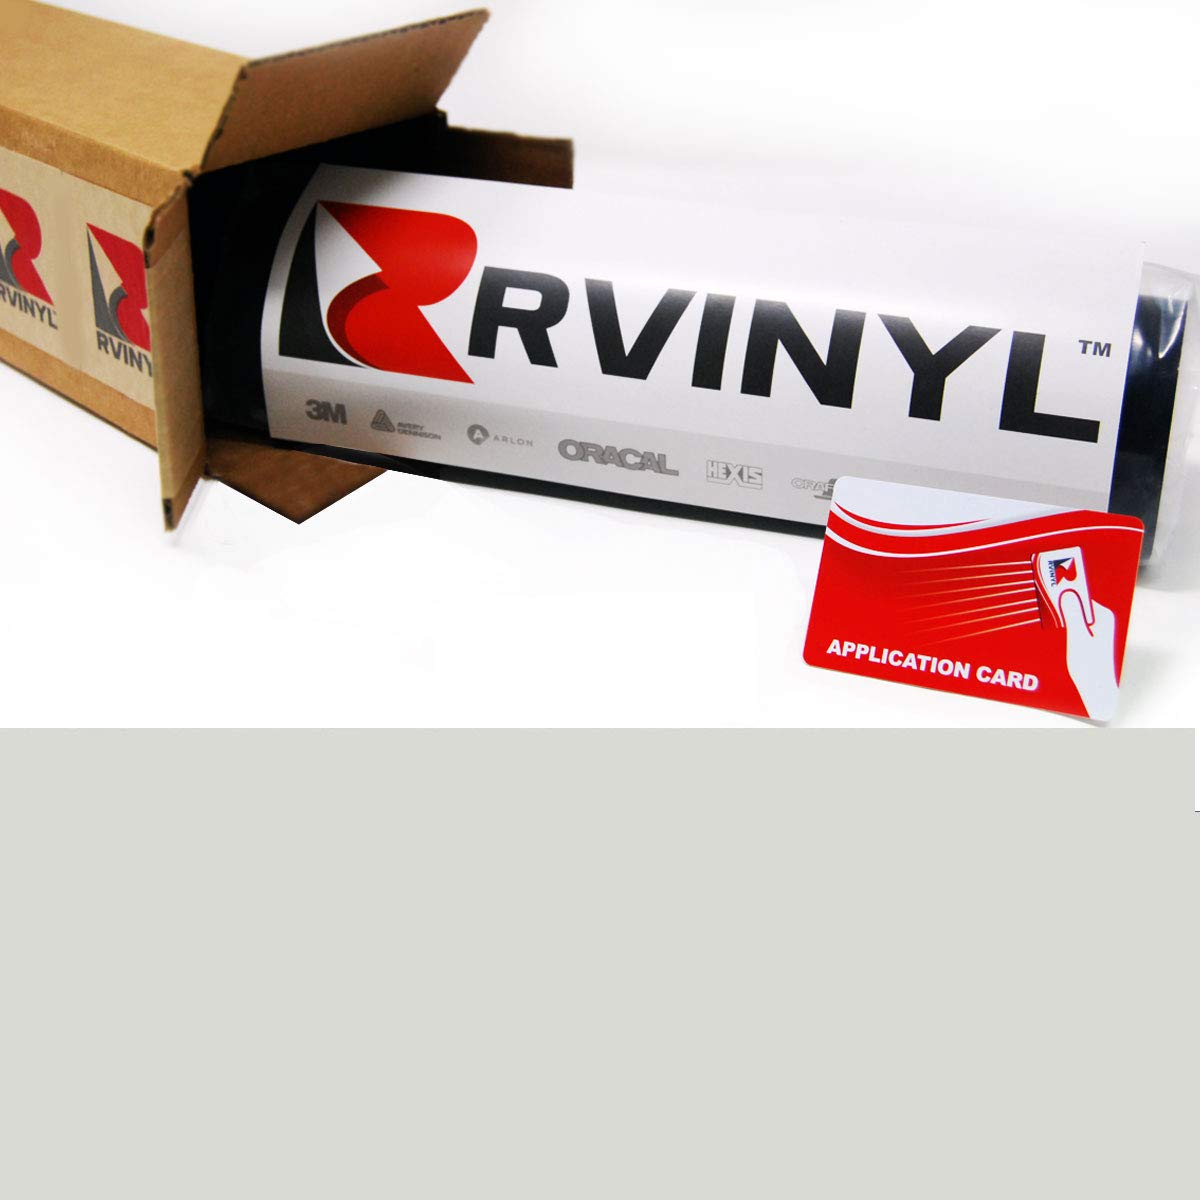 Avery Dennison HV 1200 White Reflective 101-R 2ft x 1ft High Visibility Vinyl Film Sheet Roll - for Cricut, Silhouette Cameo, Craft and Sign Cutters